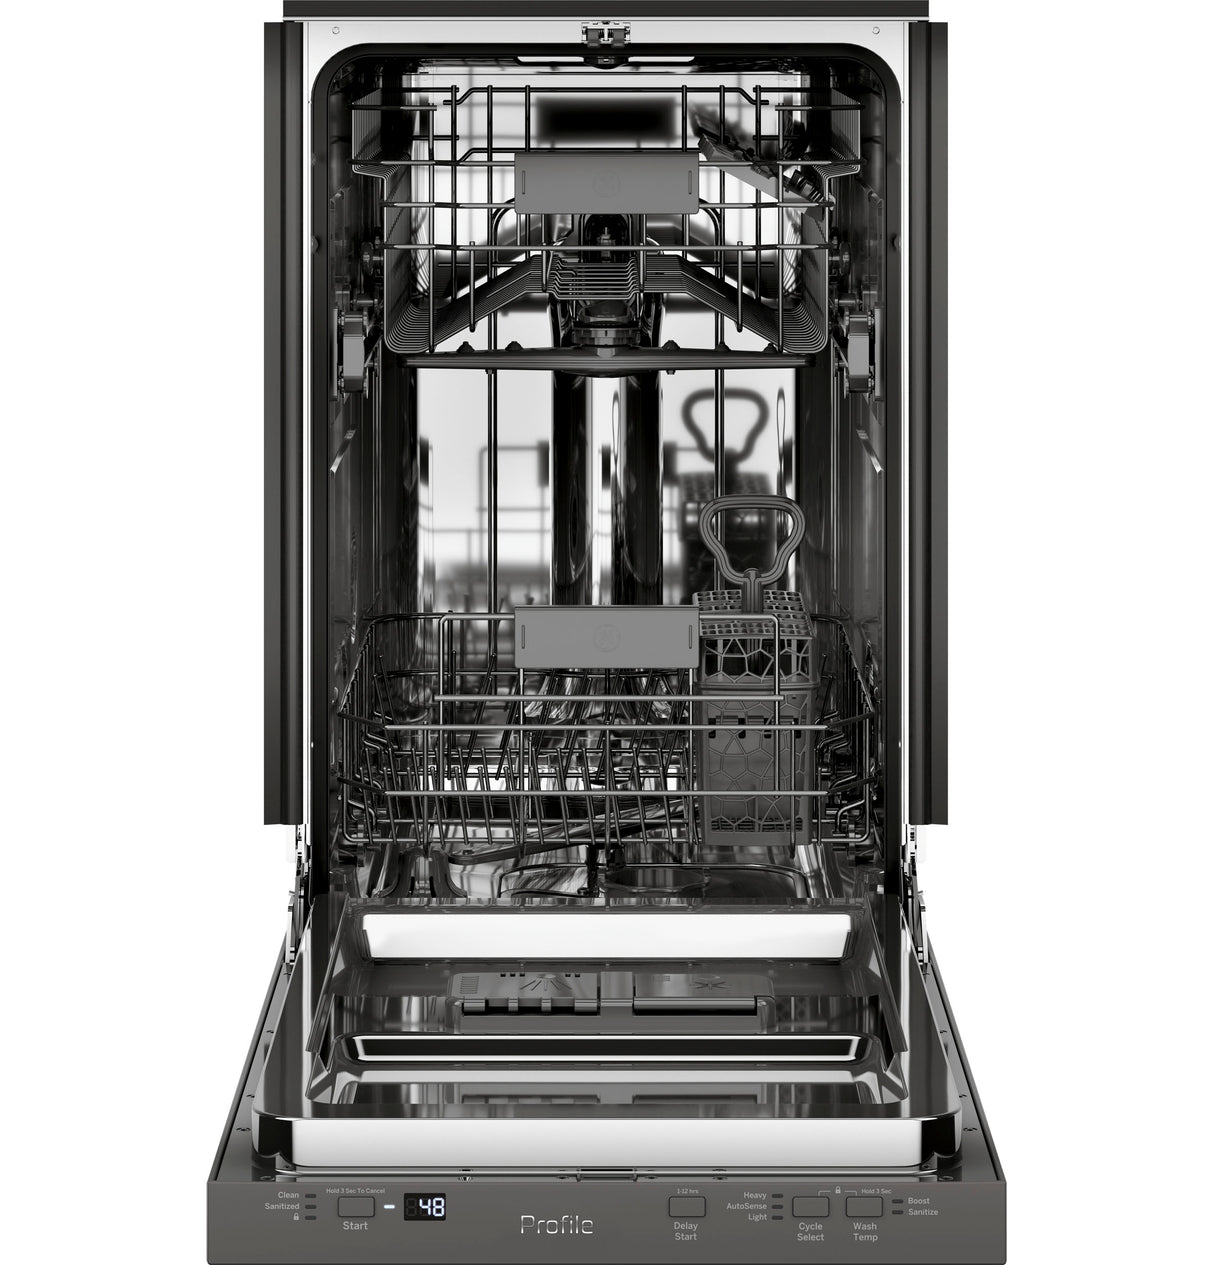 GE Profile(TM) ENERGY STAR(R) 18" ADA Compliant Stainless Steel Interior Dishwasher with Sanitize Cycle - (PDT145SSLSS)